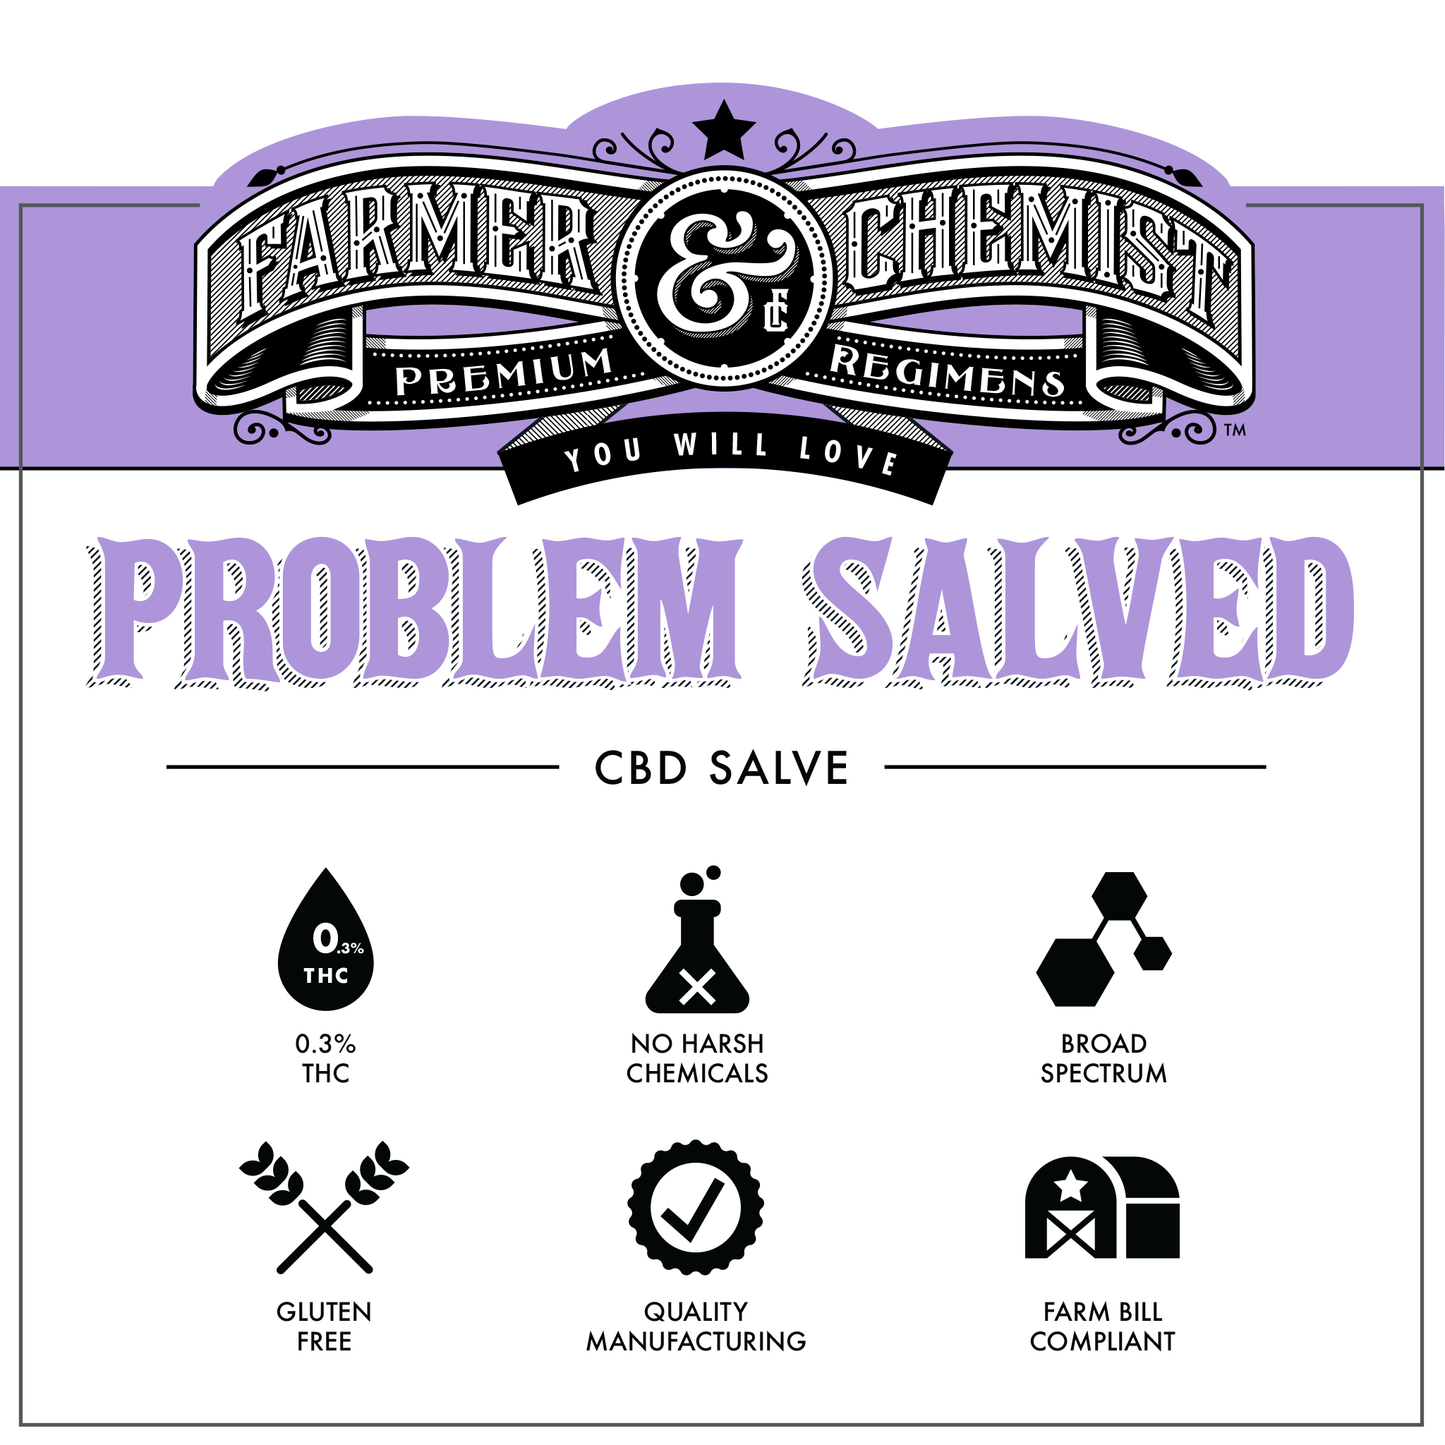 PROBLEM SALVED - 1oz. 2000mg with Lavender (Case pack of 4)